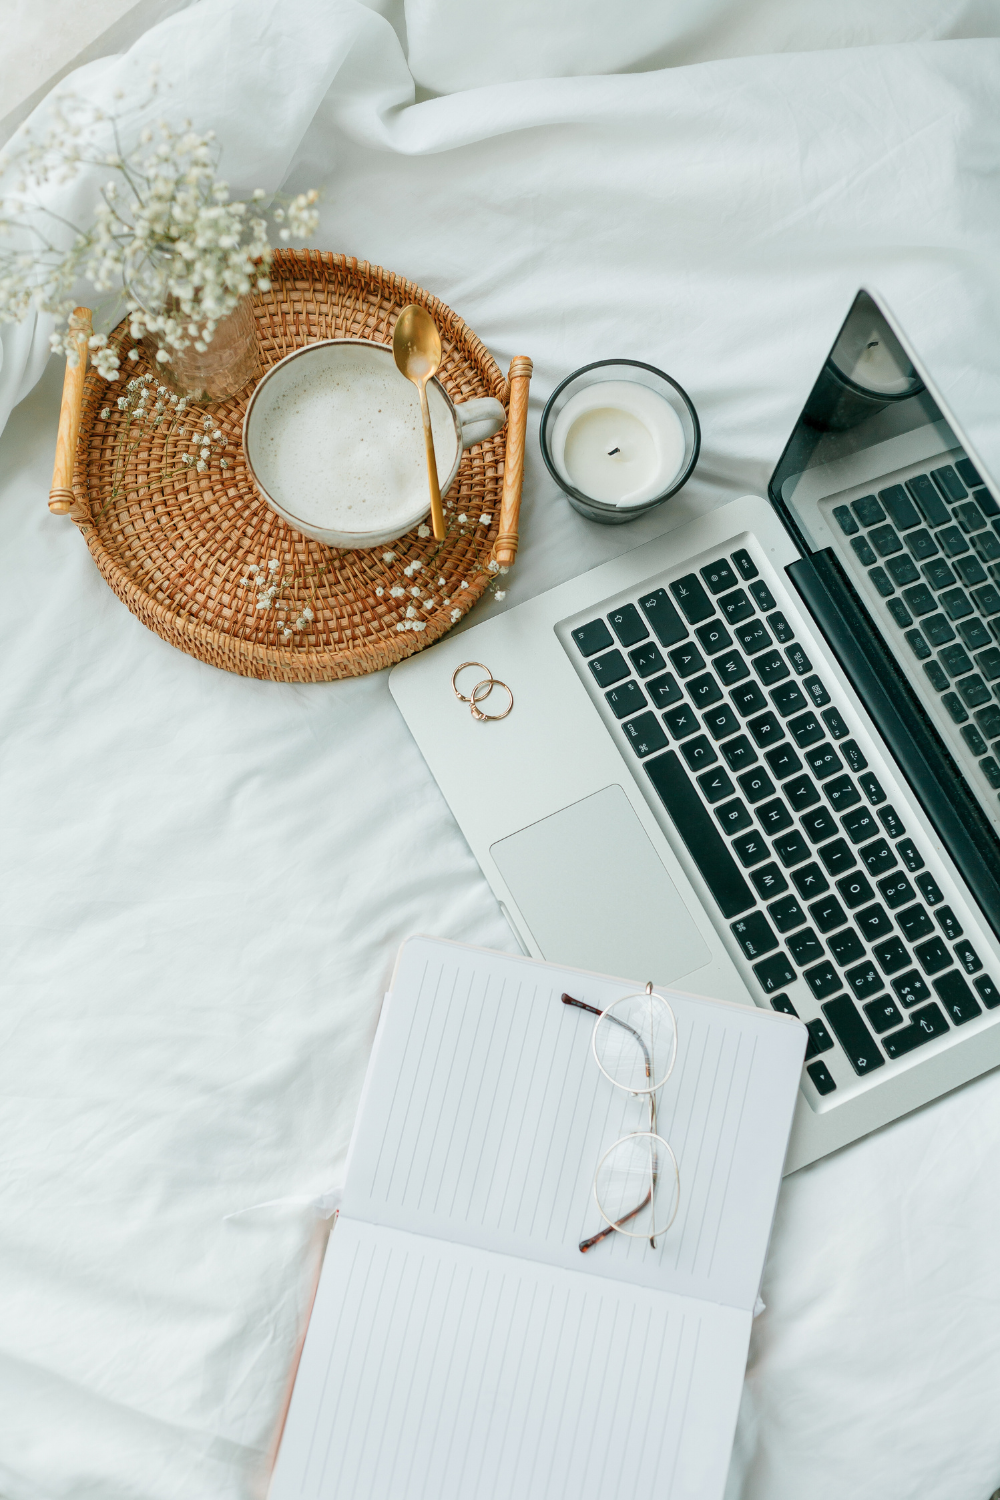 10 Essential Tips for a Productive Work from Home Routine